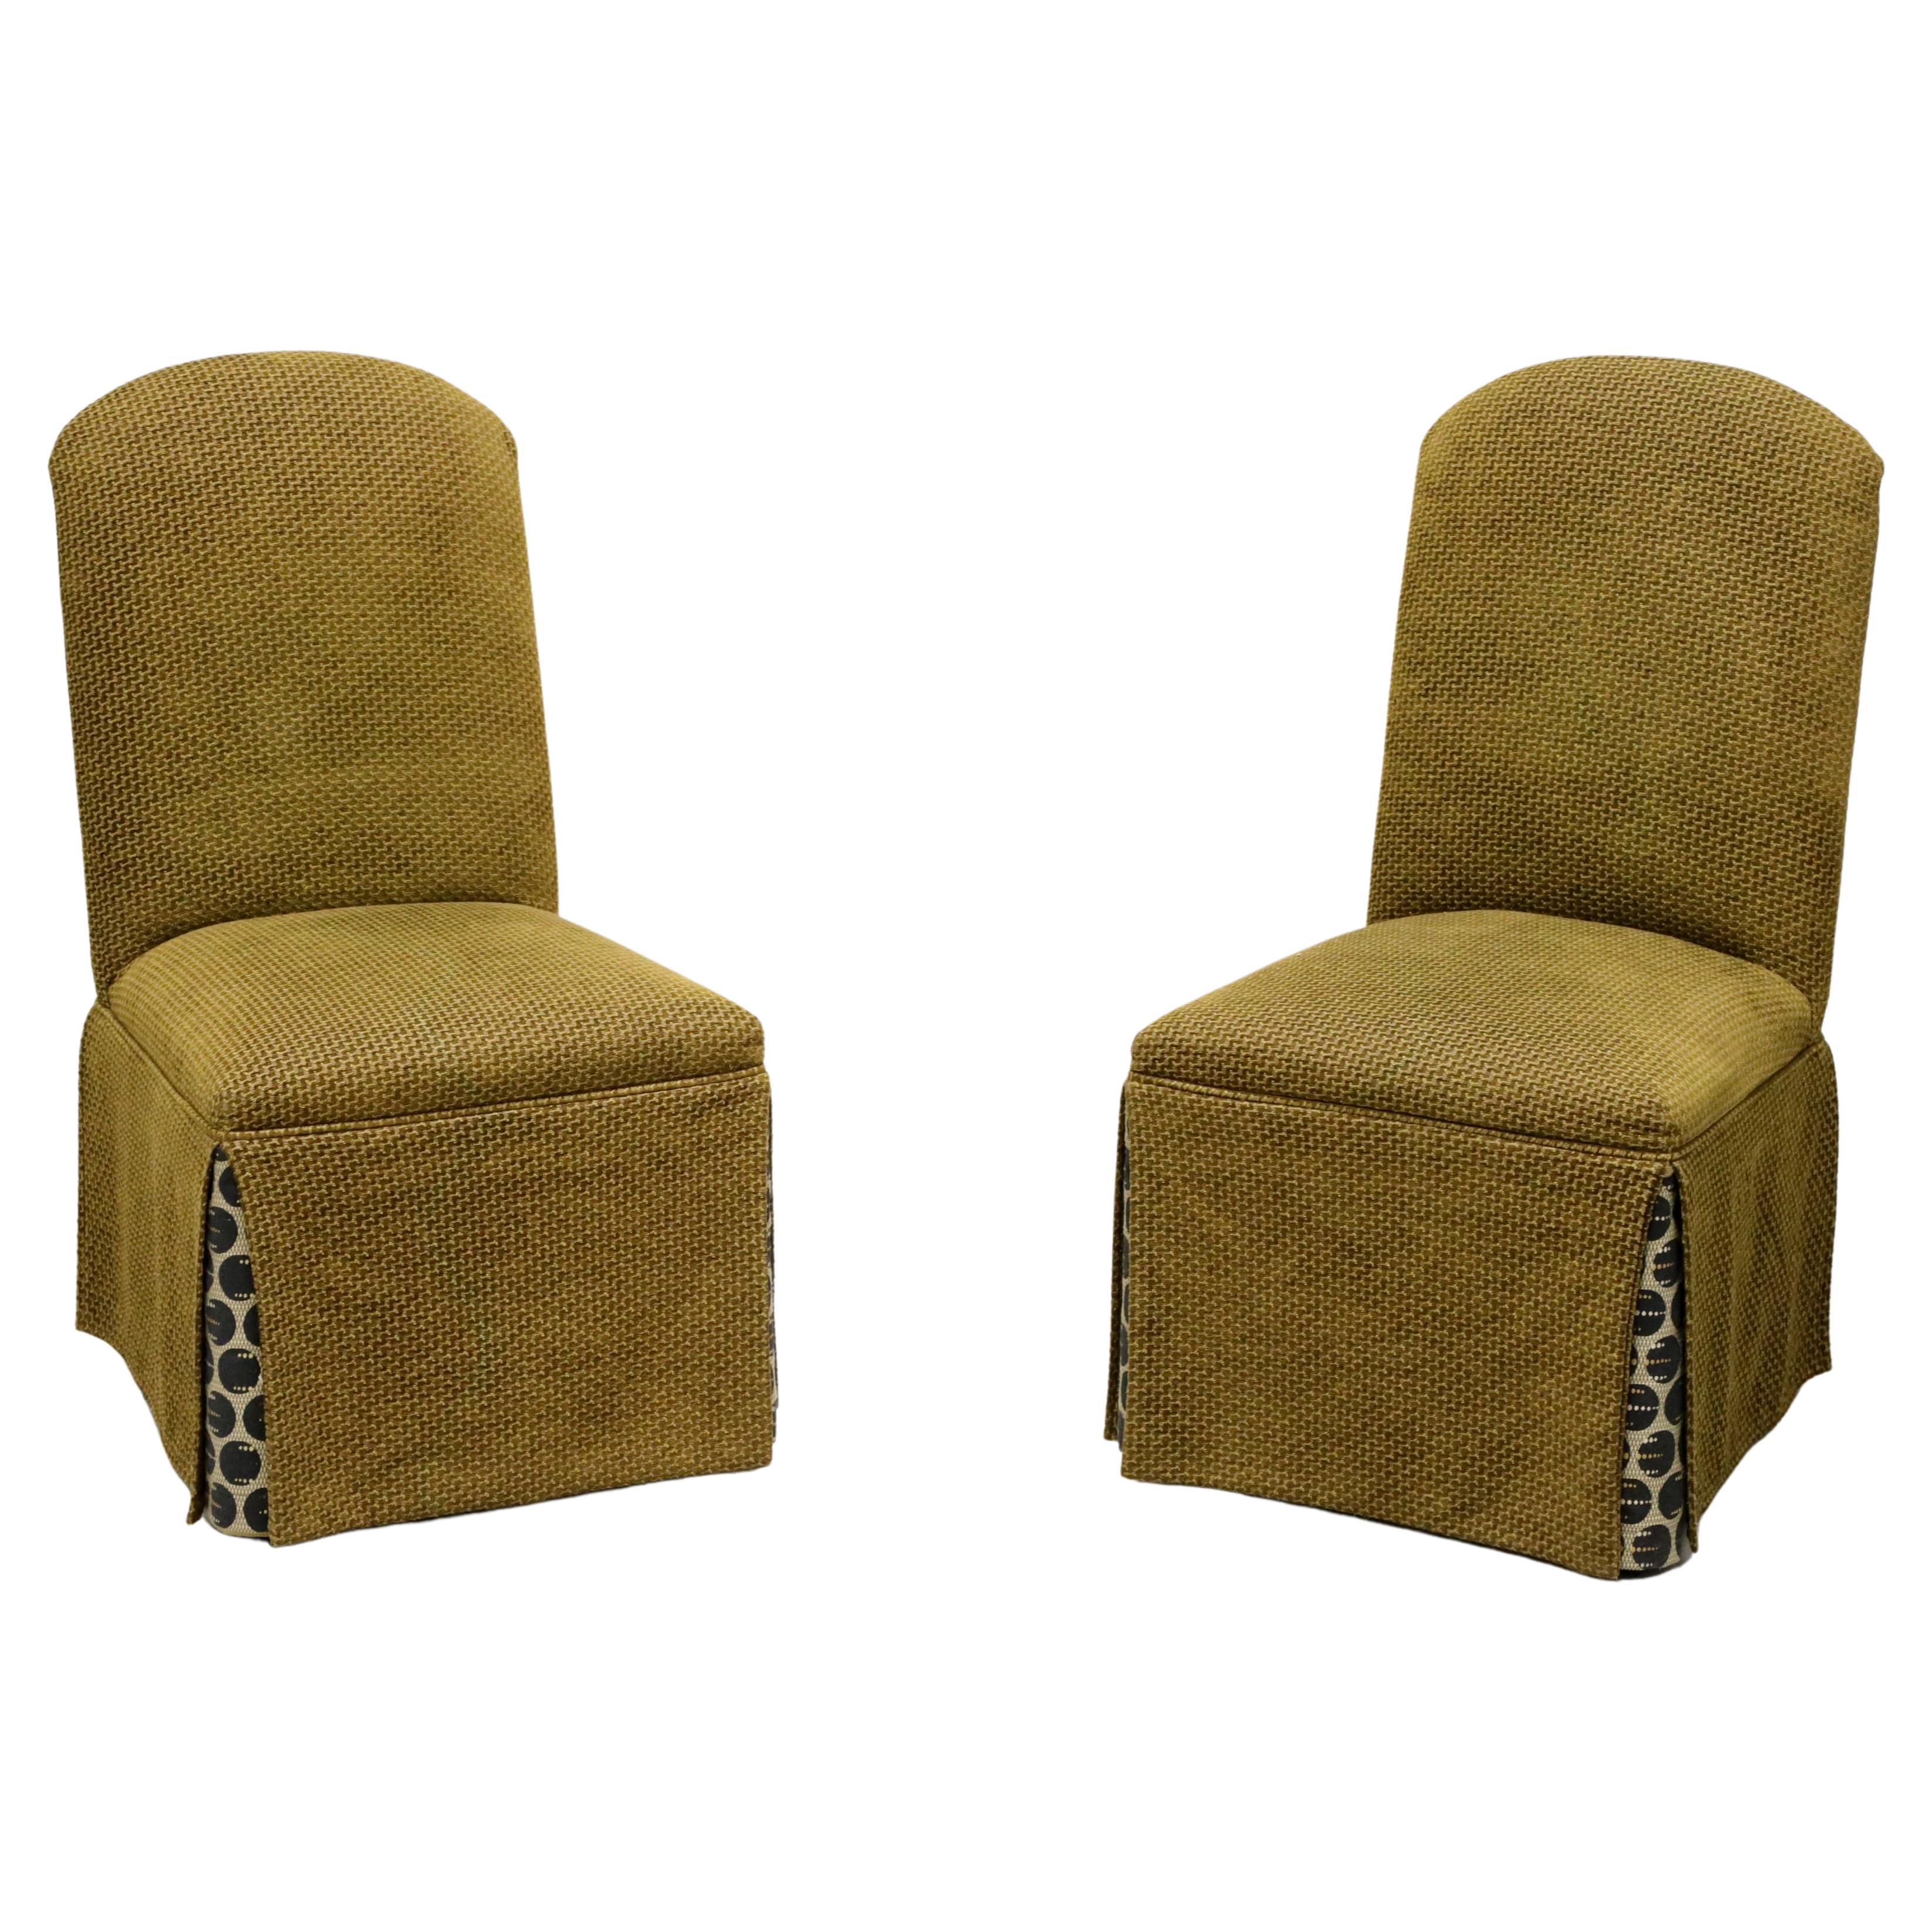 21st Century Olive Green Upholstered Transitional Style Parsons Chairs - Pair For Sale